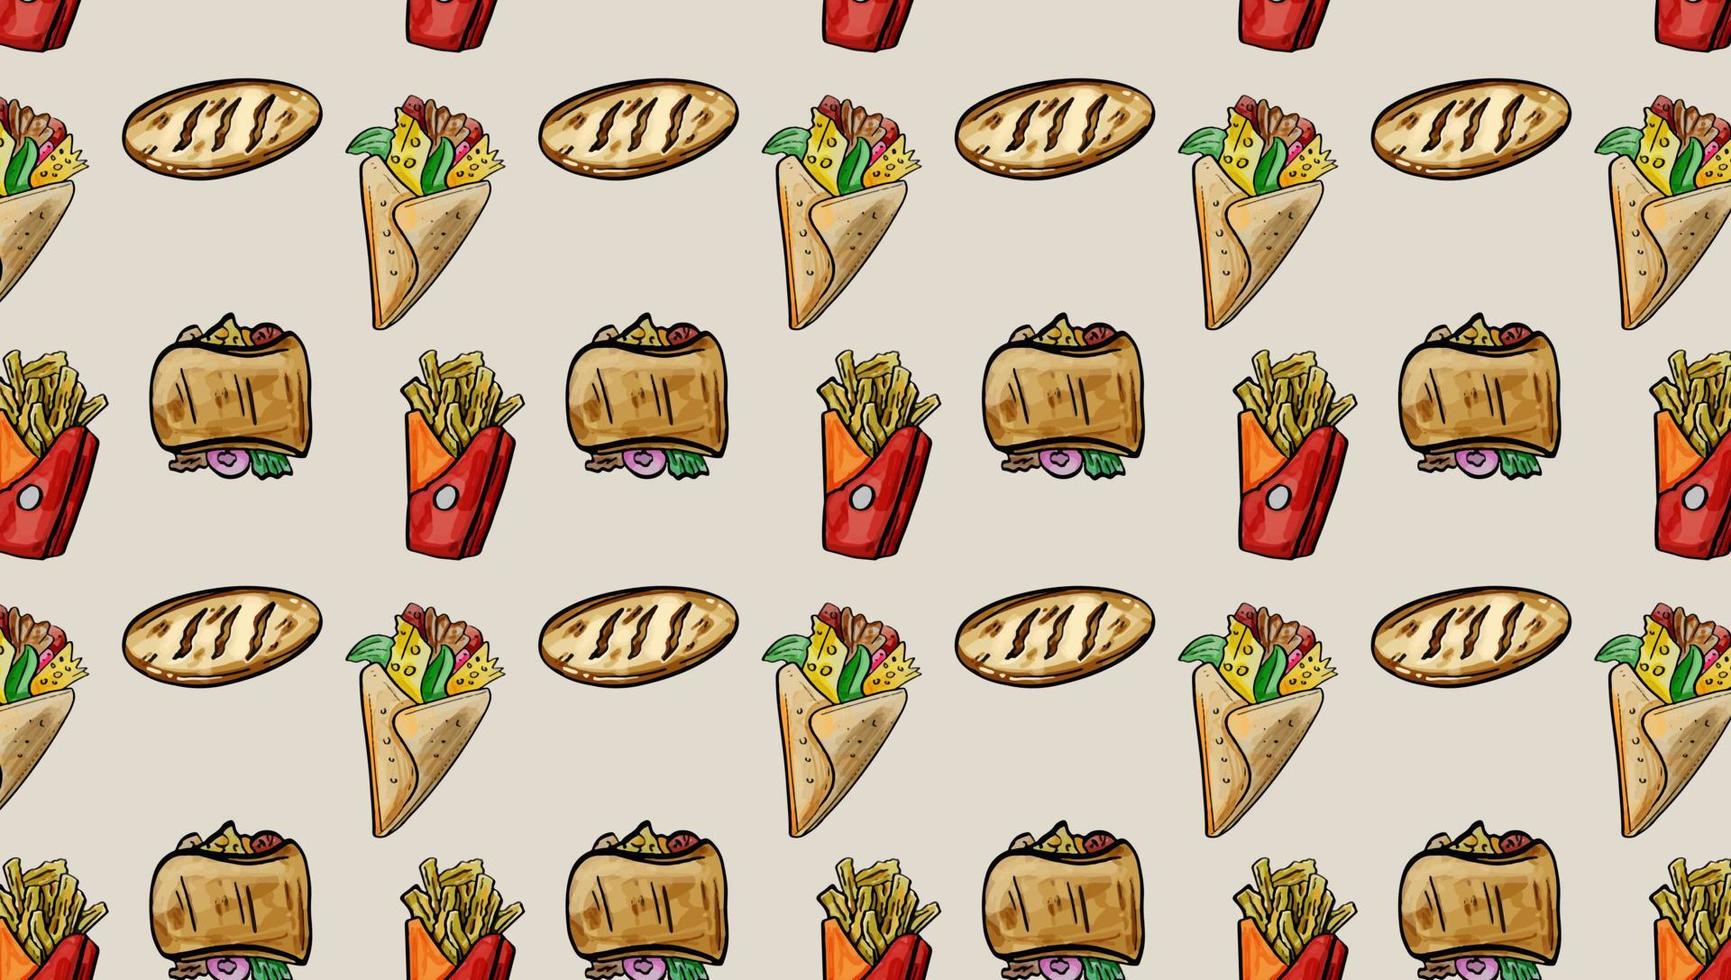 Fast Food Junk  Isometric Seamless Pattern Background Template flat design for decorative or gift wrapping paper, vector